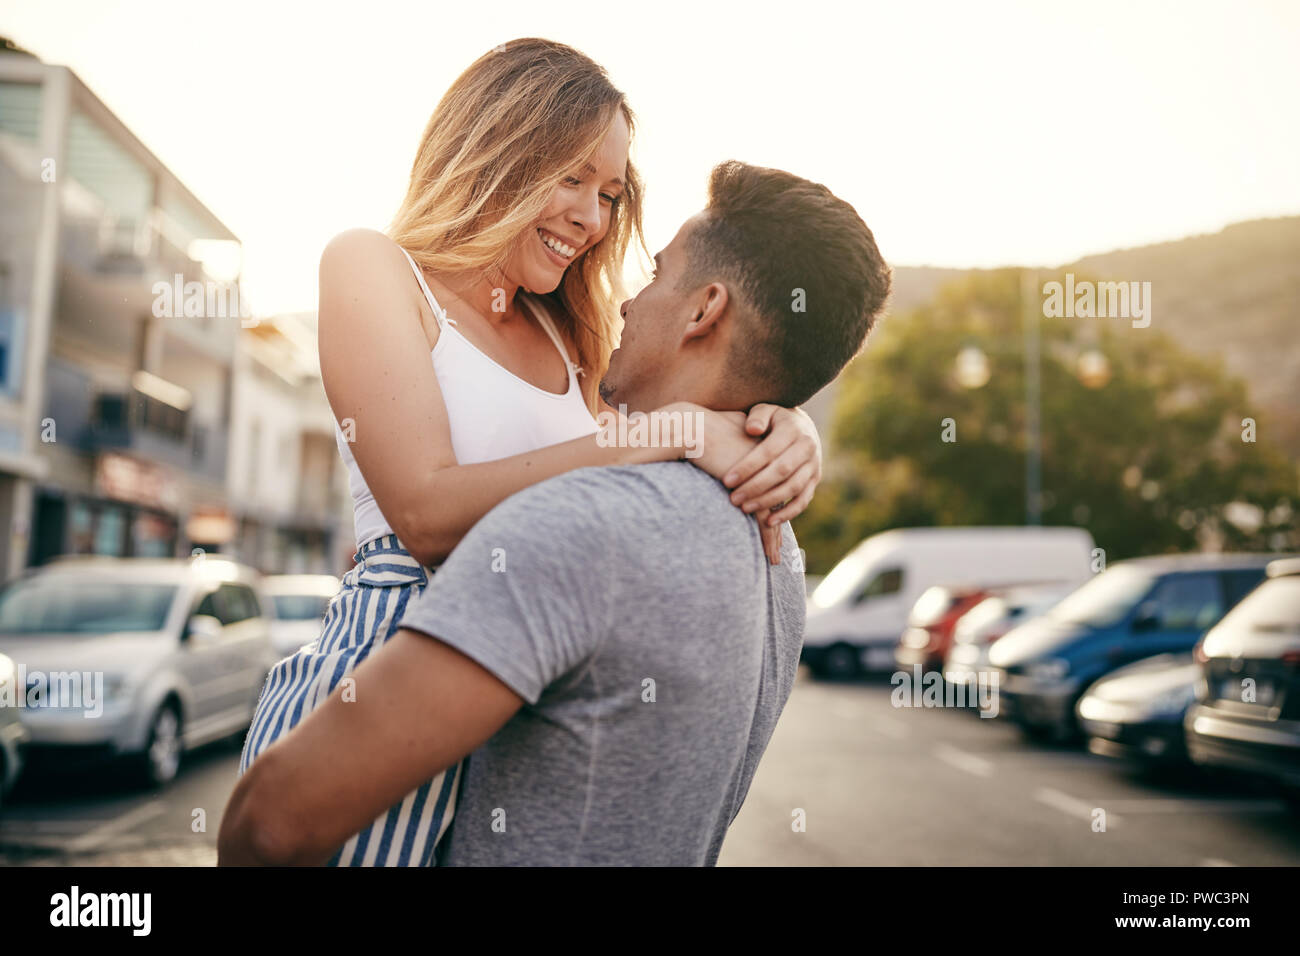 Smiling young man holding his girlfriend in his arms while looking into each other's eyes on a city street at sunset Stock Photo